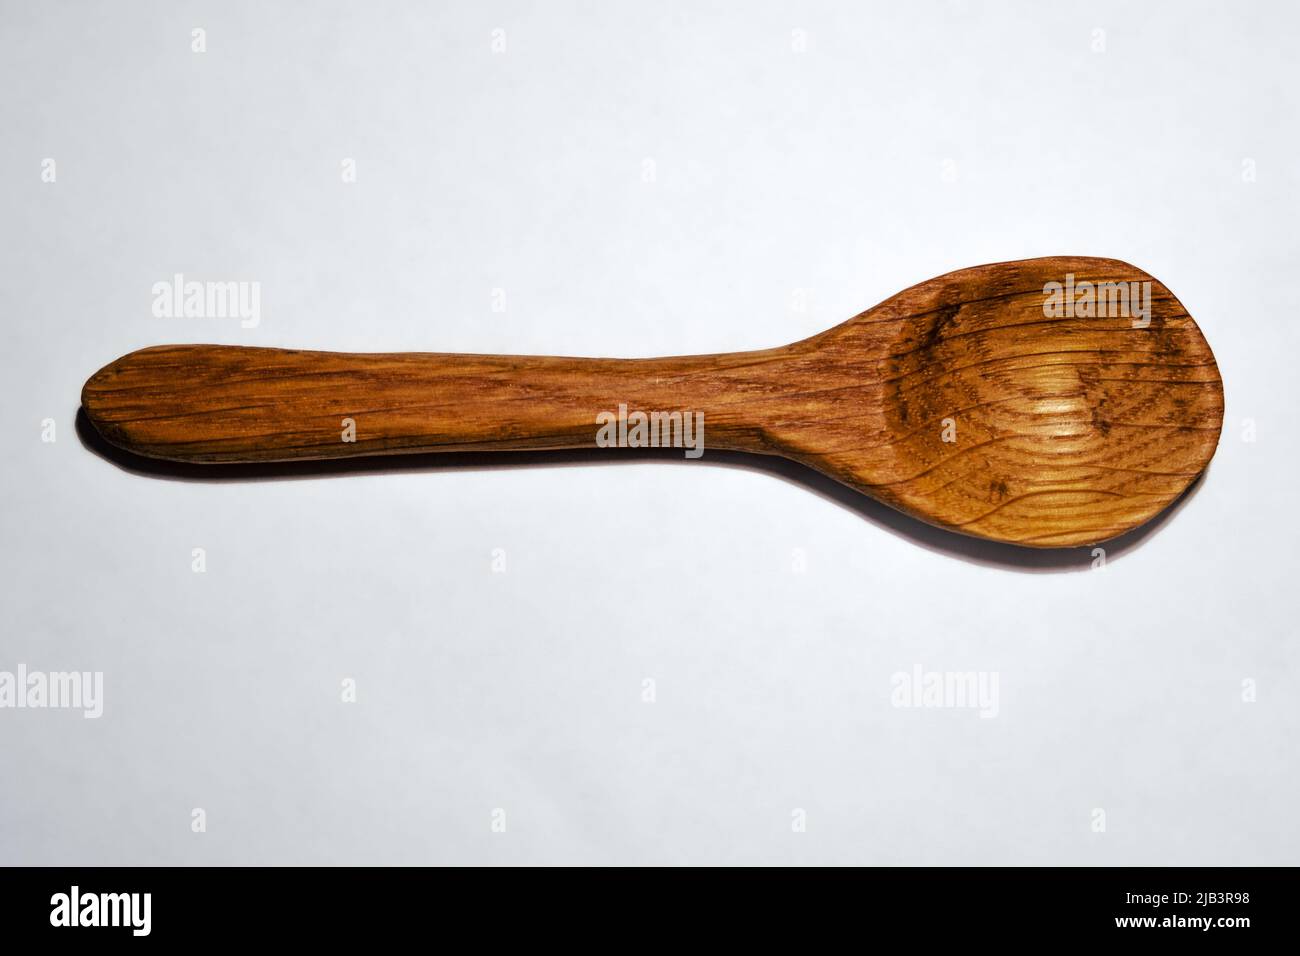 Handcarved wooden spoon Stock Photo